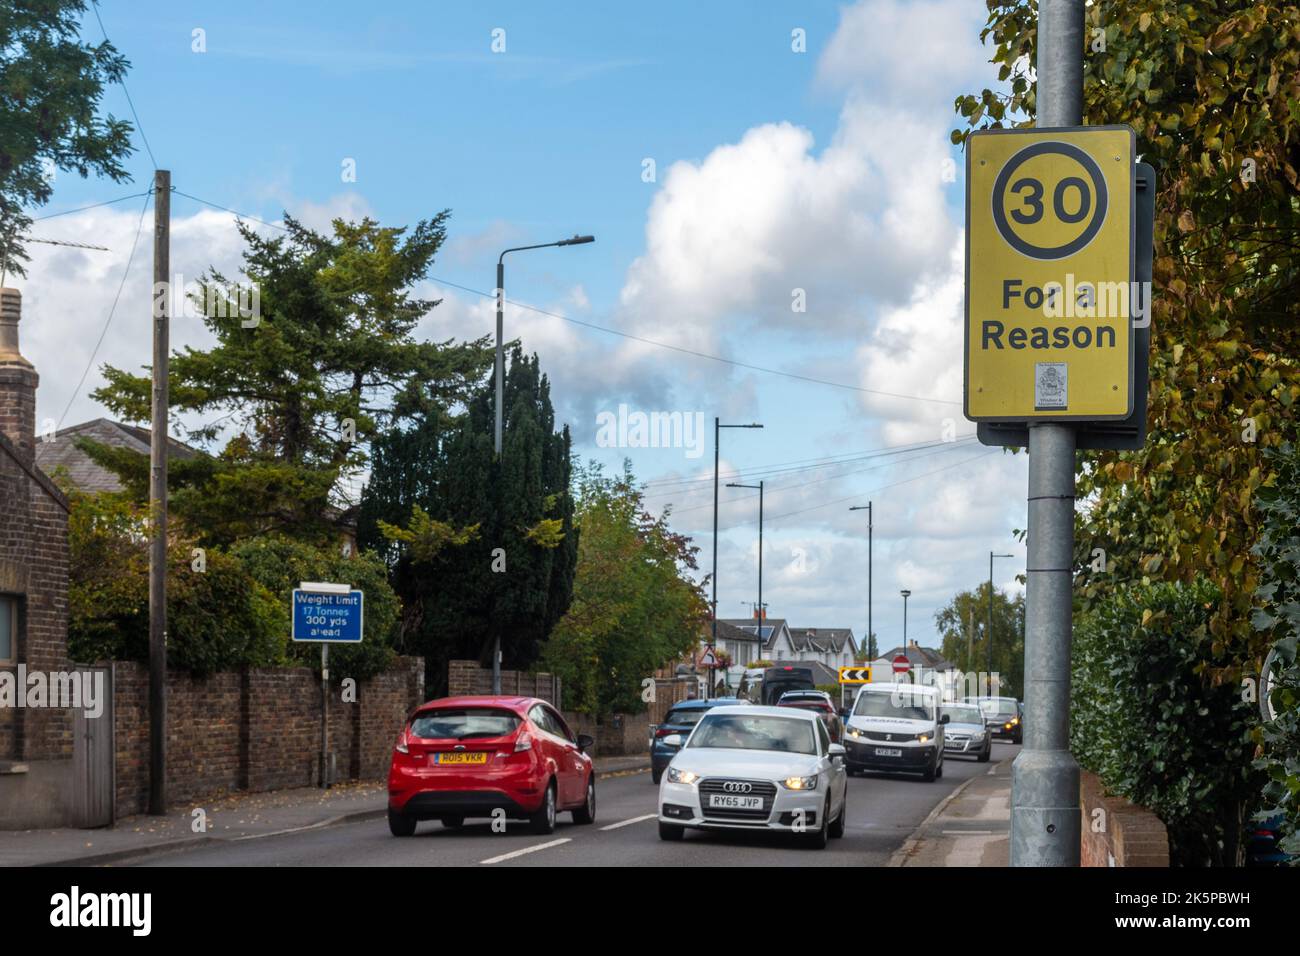 30 for a reason road sign on a busy street in Old Windsor, Berkshire, England, UK. Road safety signage Stock Photo